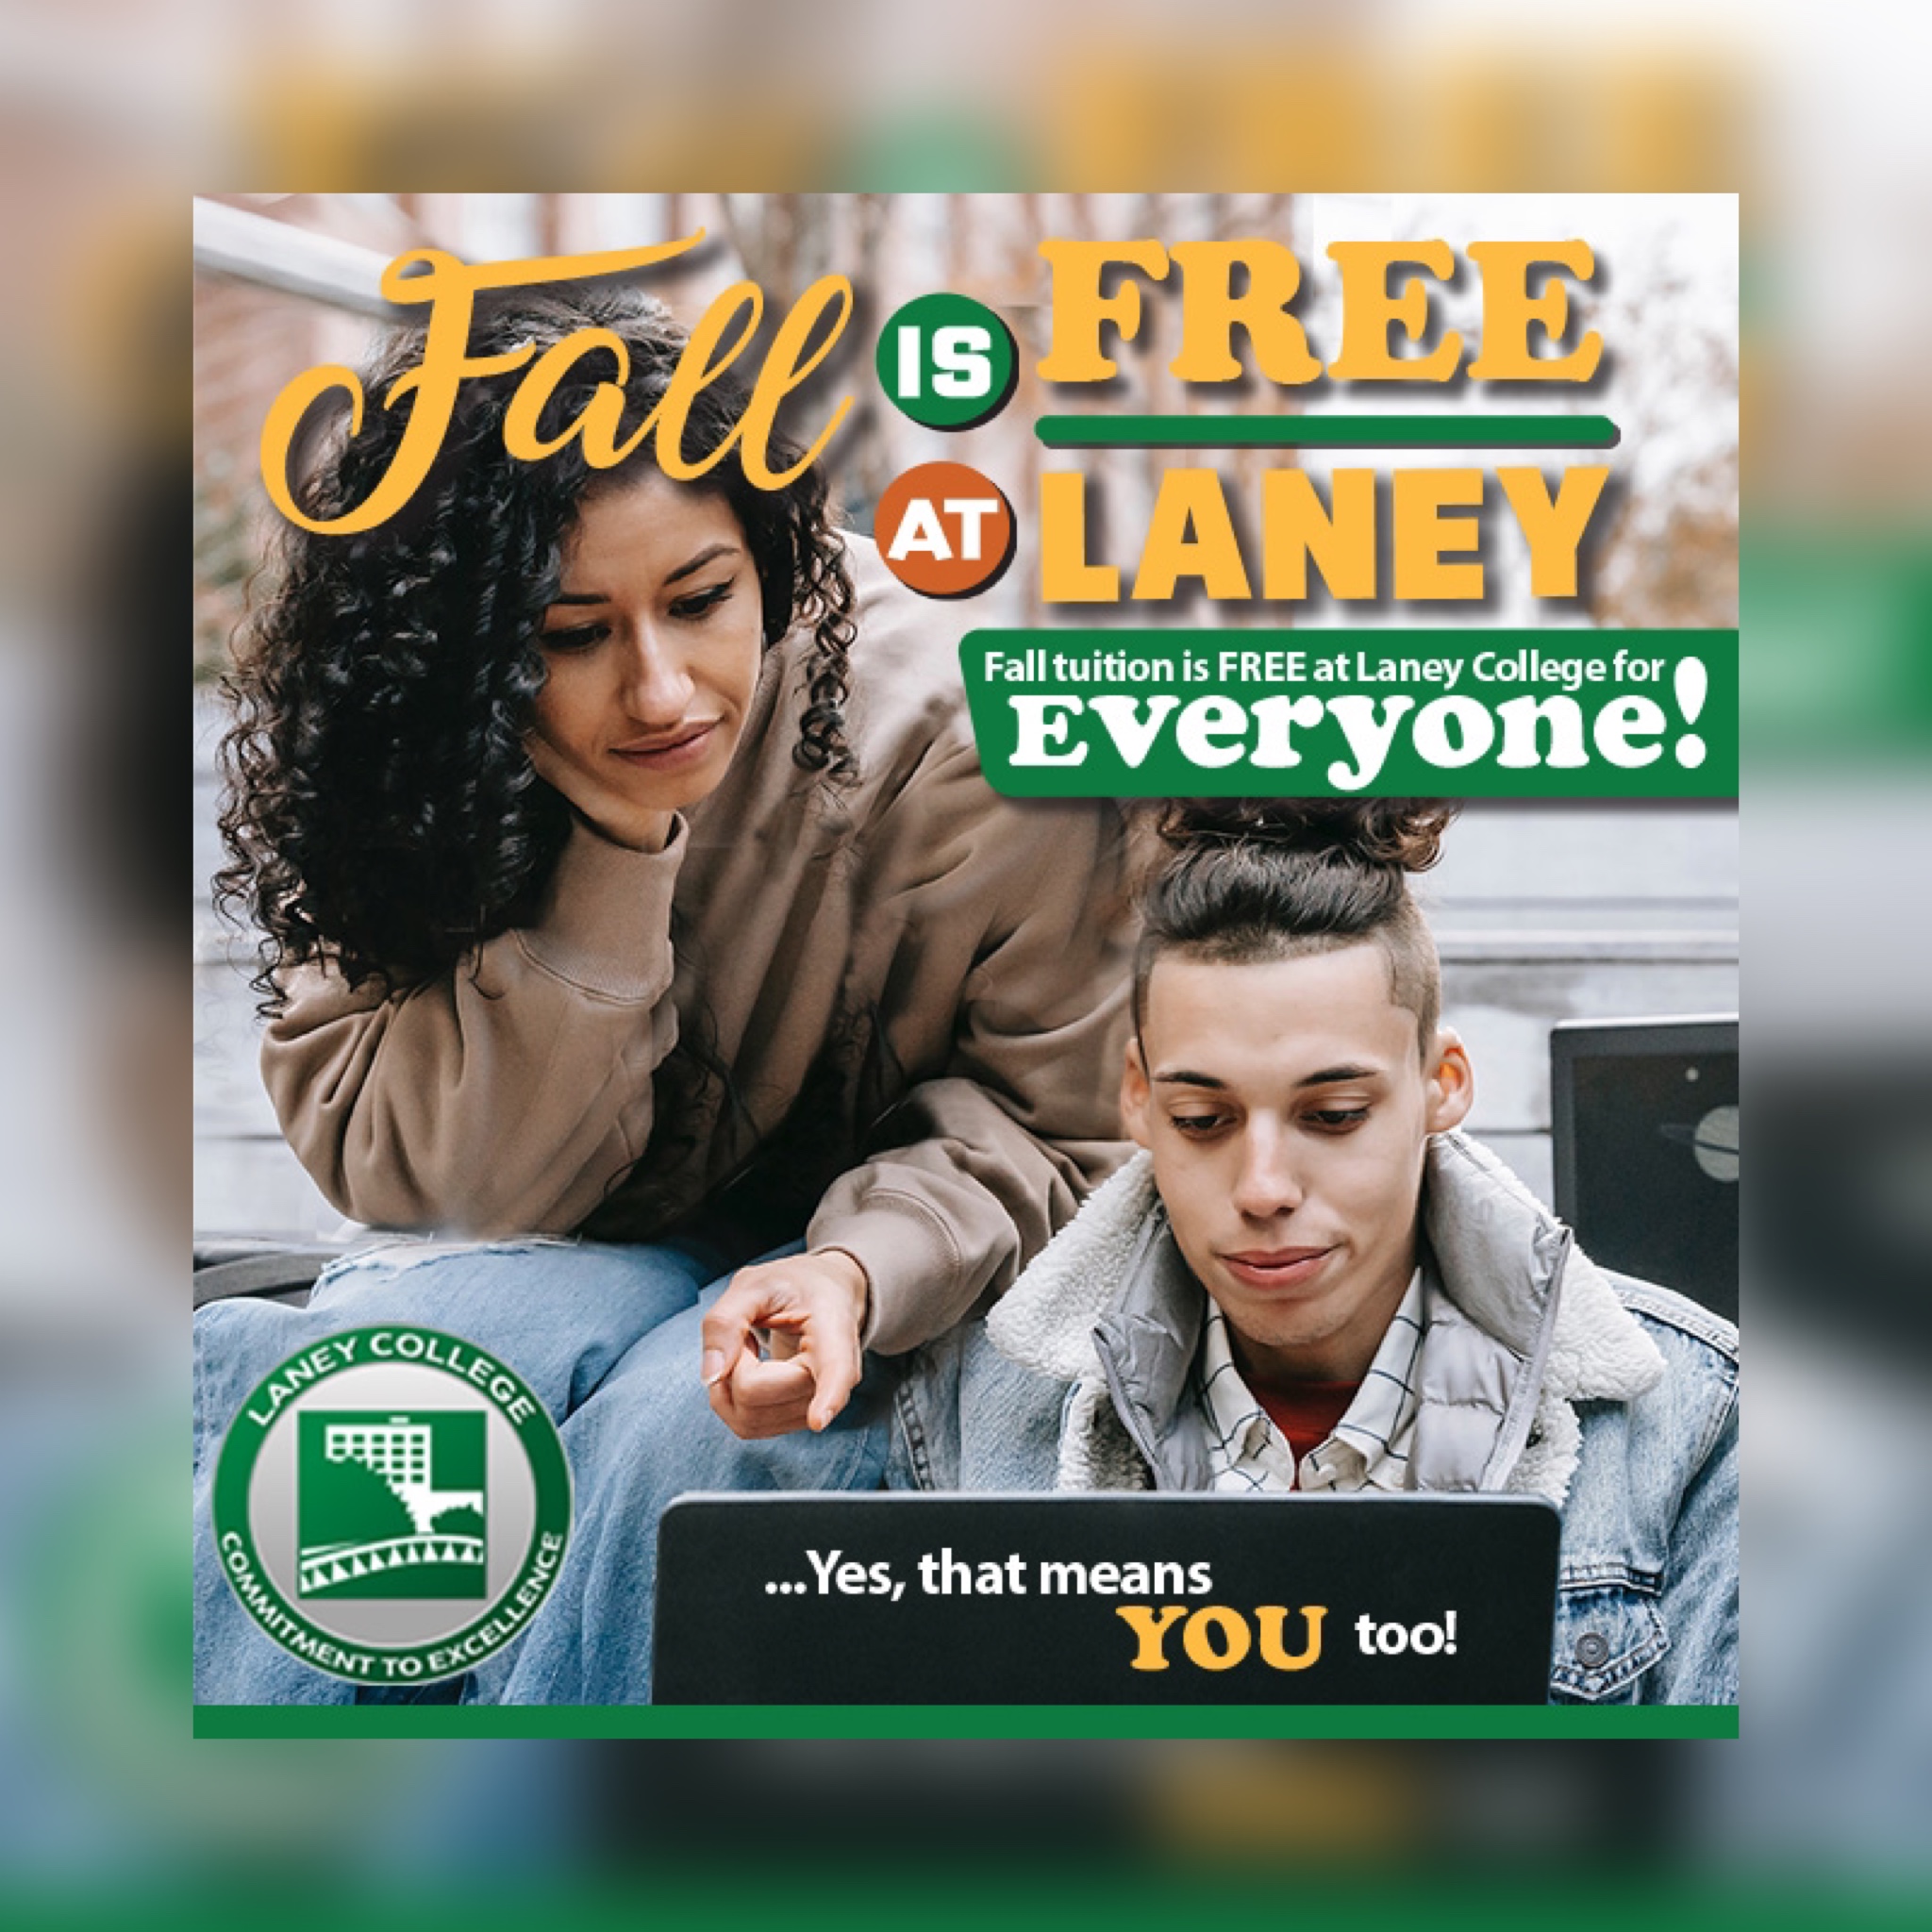 "Fall is Free" at Laney College Free Tuition, Textbooks, Lunch & More